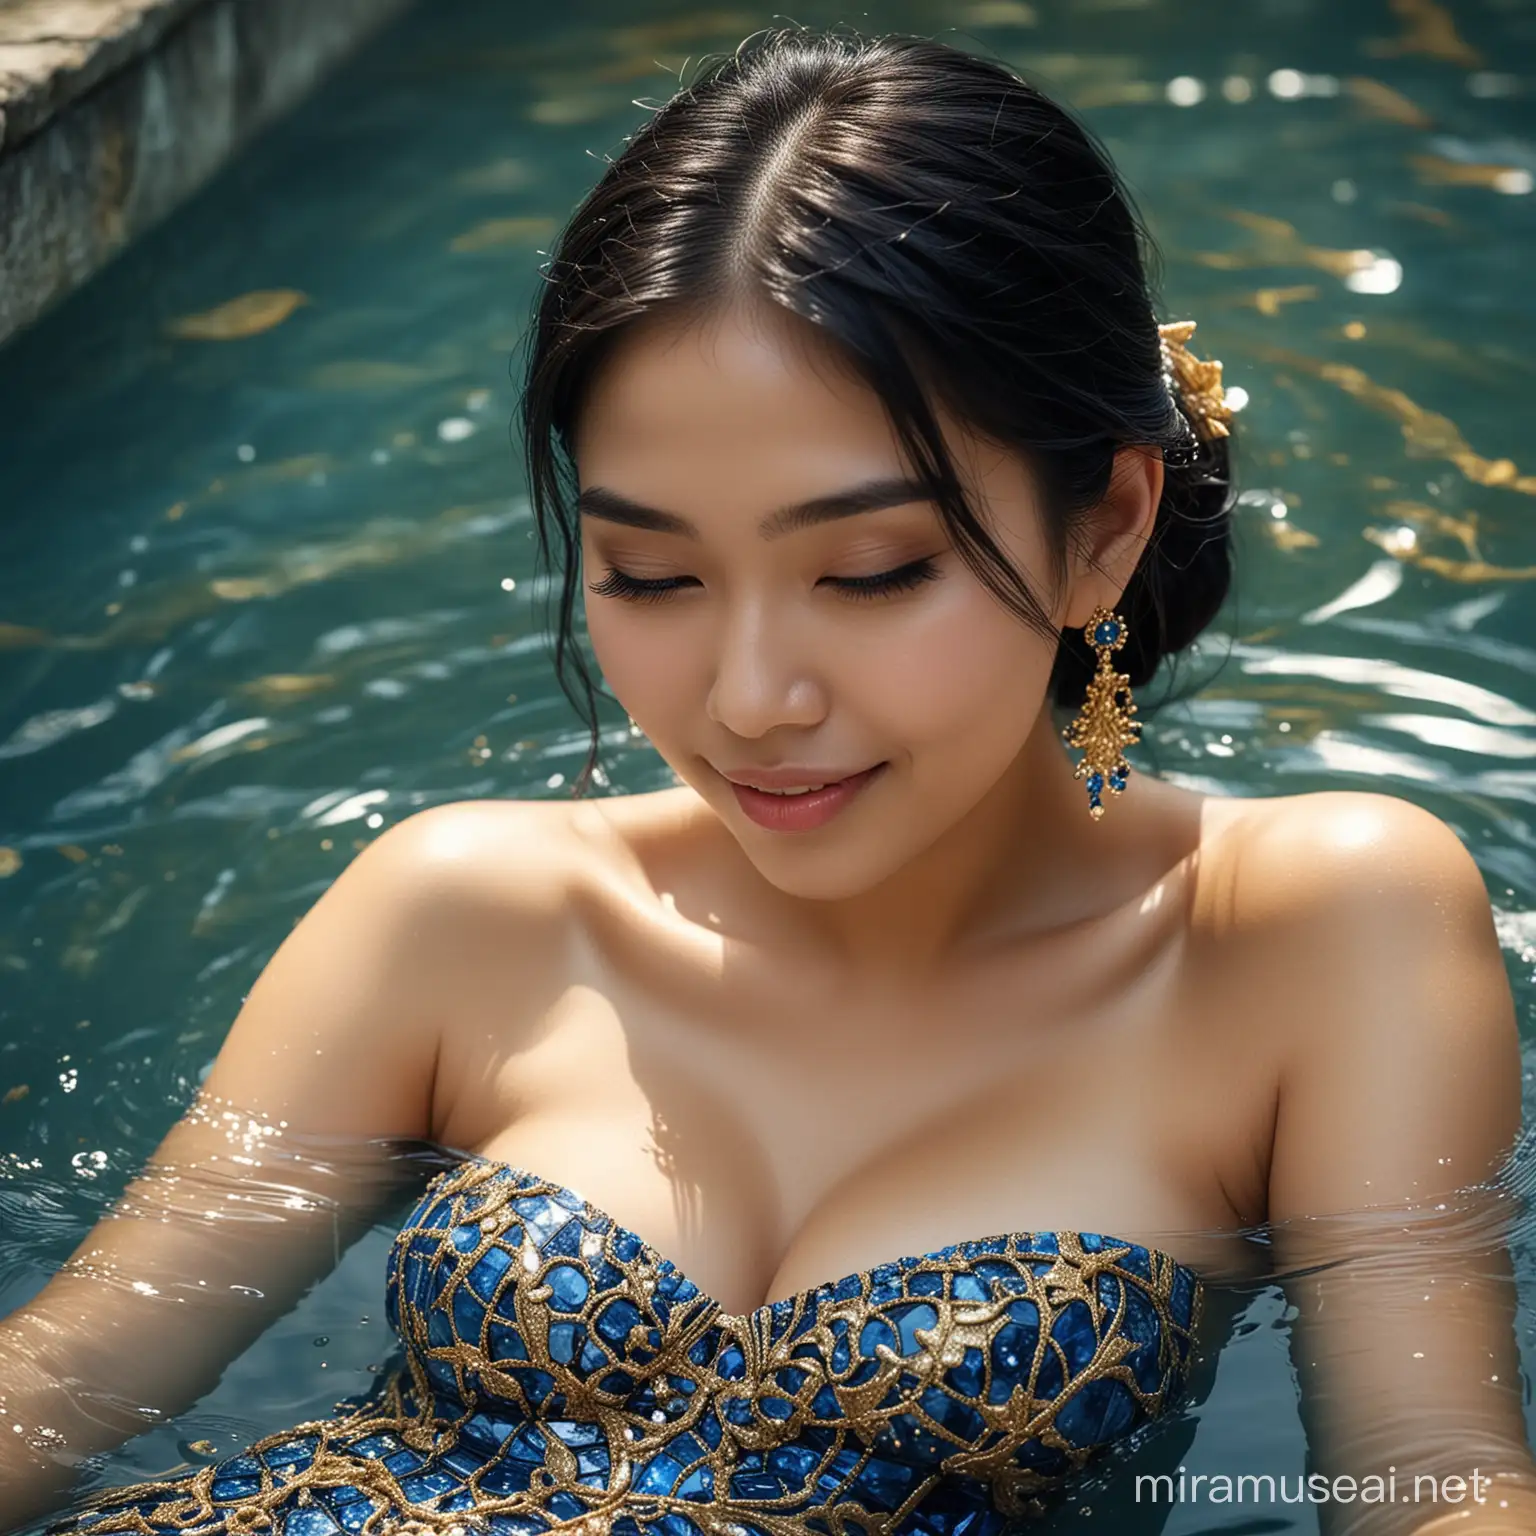 Thai Elegance 21YearOld in Blue Gold Glass Couture Dress